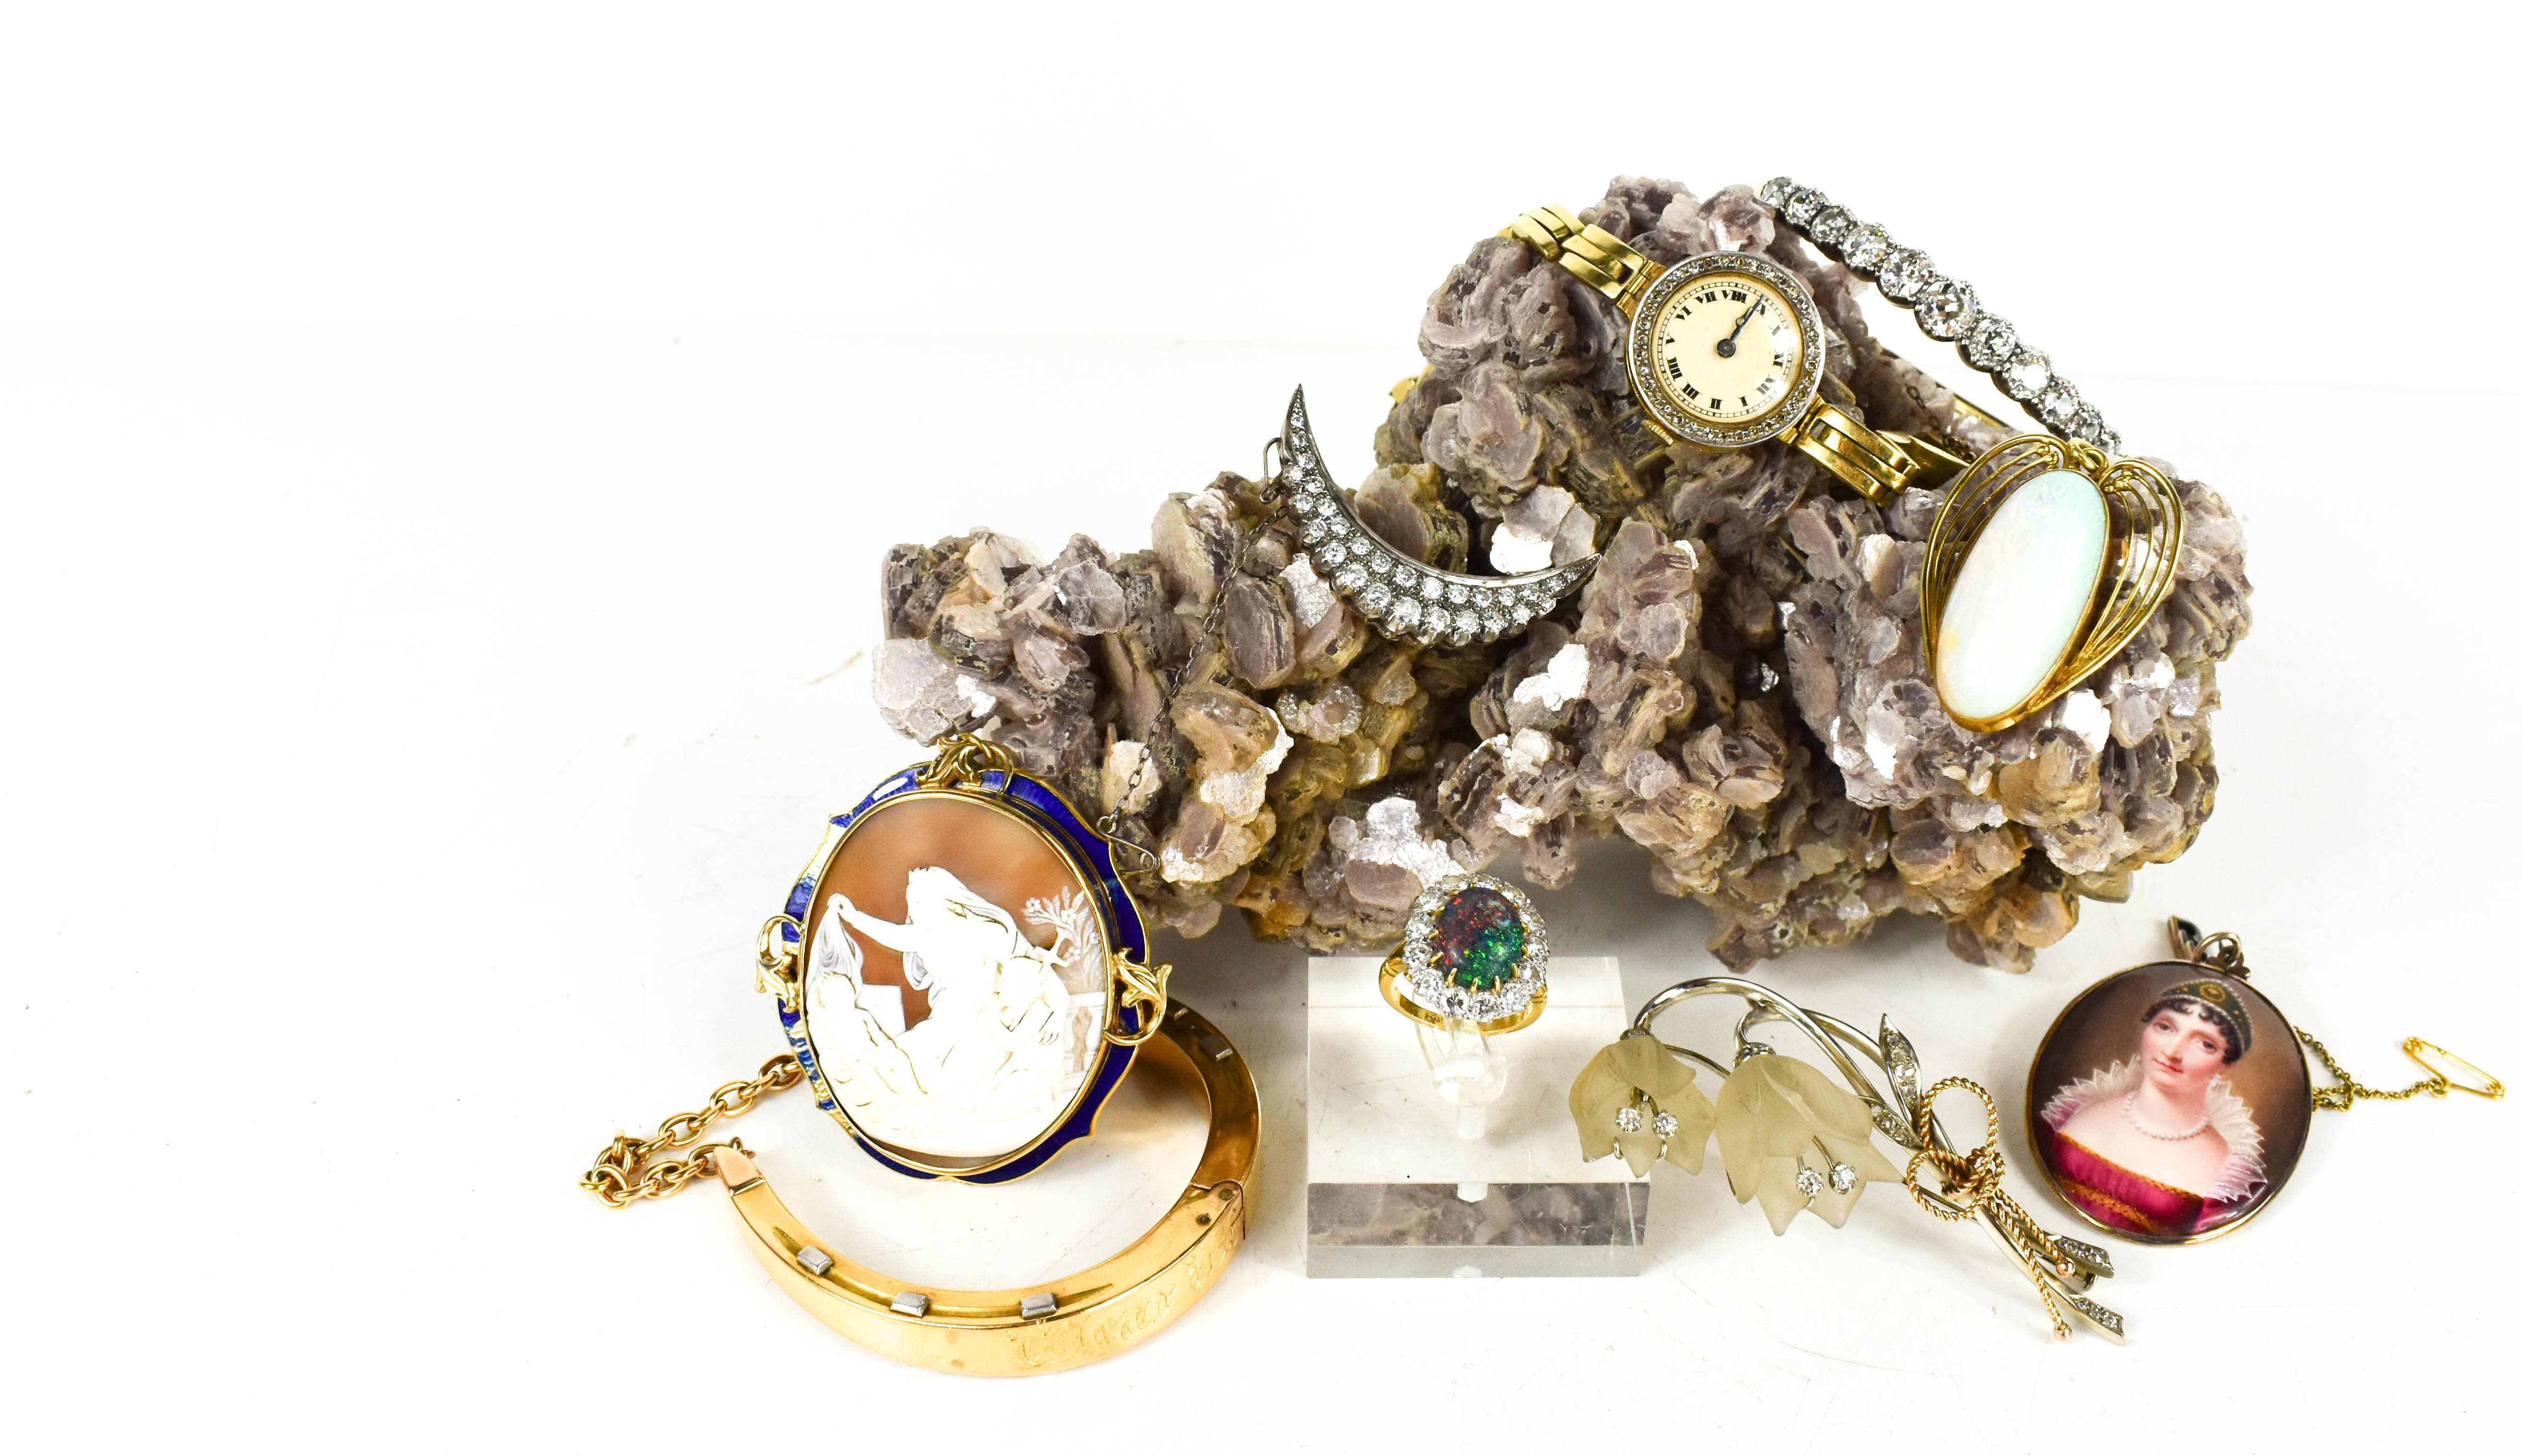 Specialist Jewellery, Silver & Gold Auction